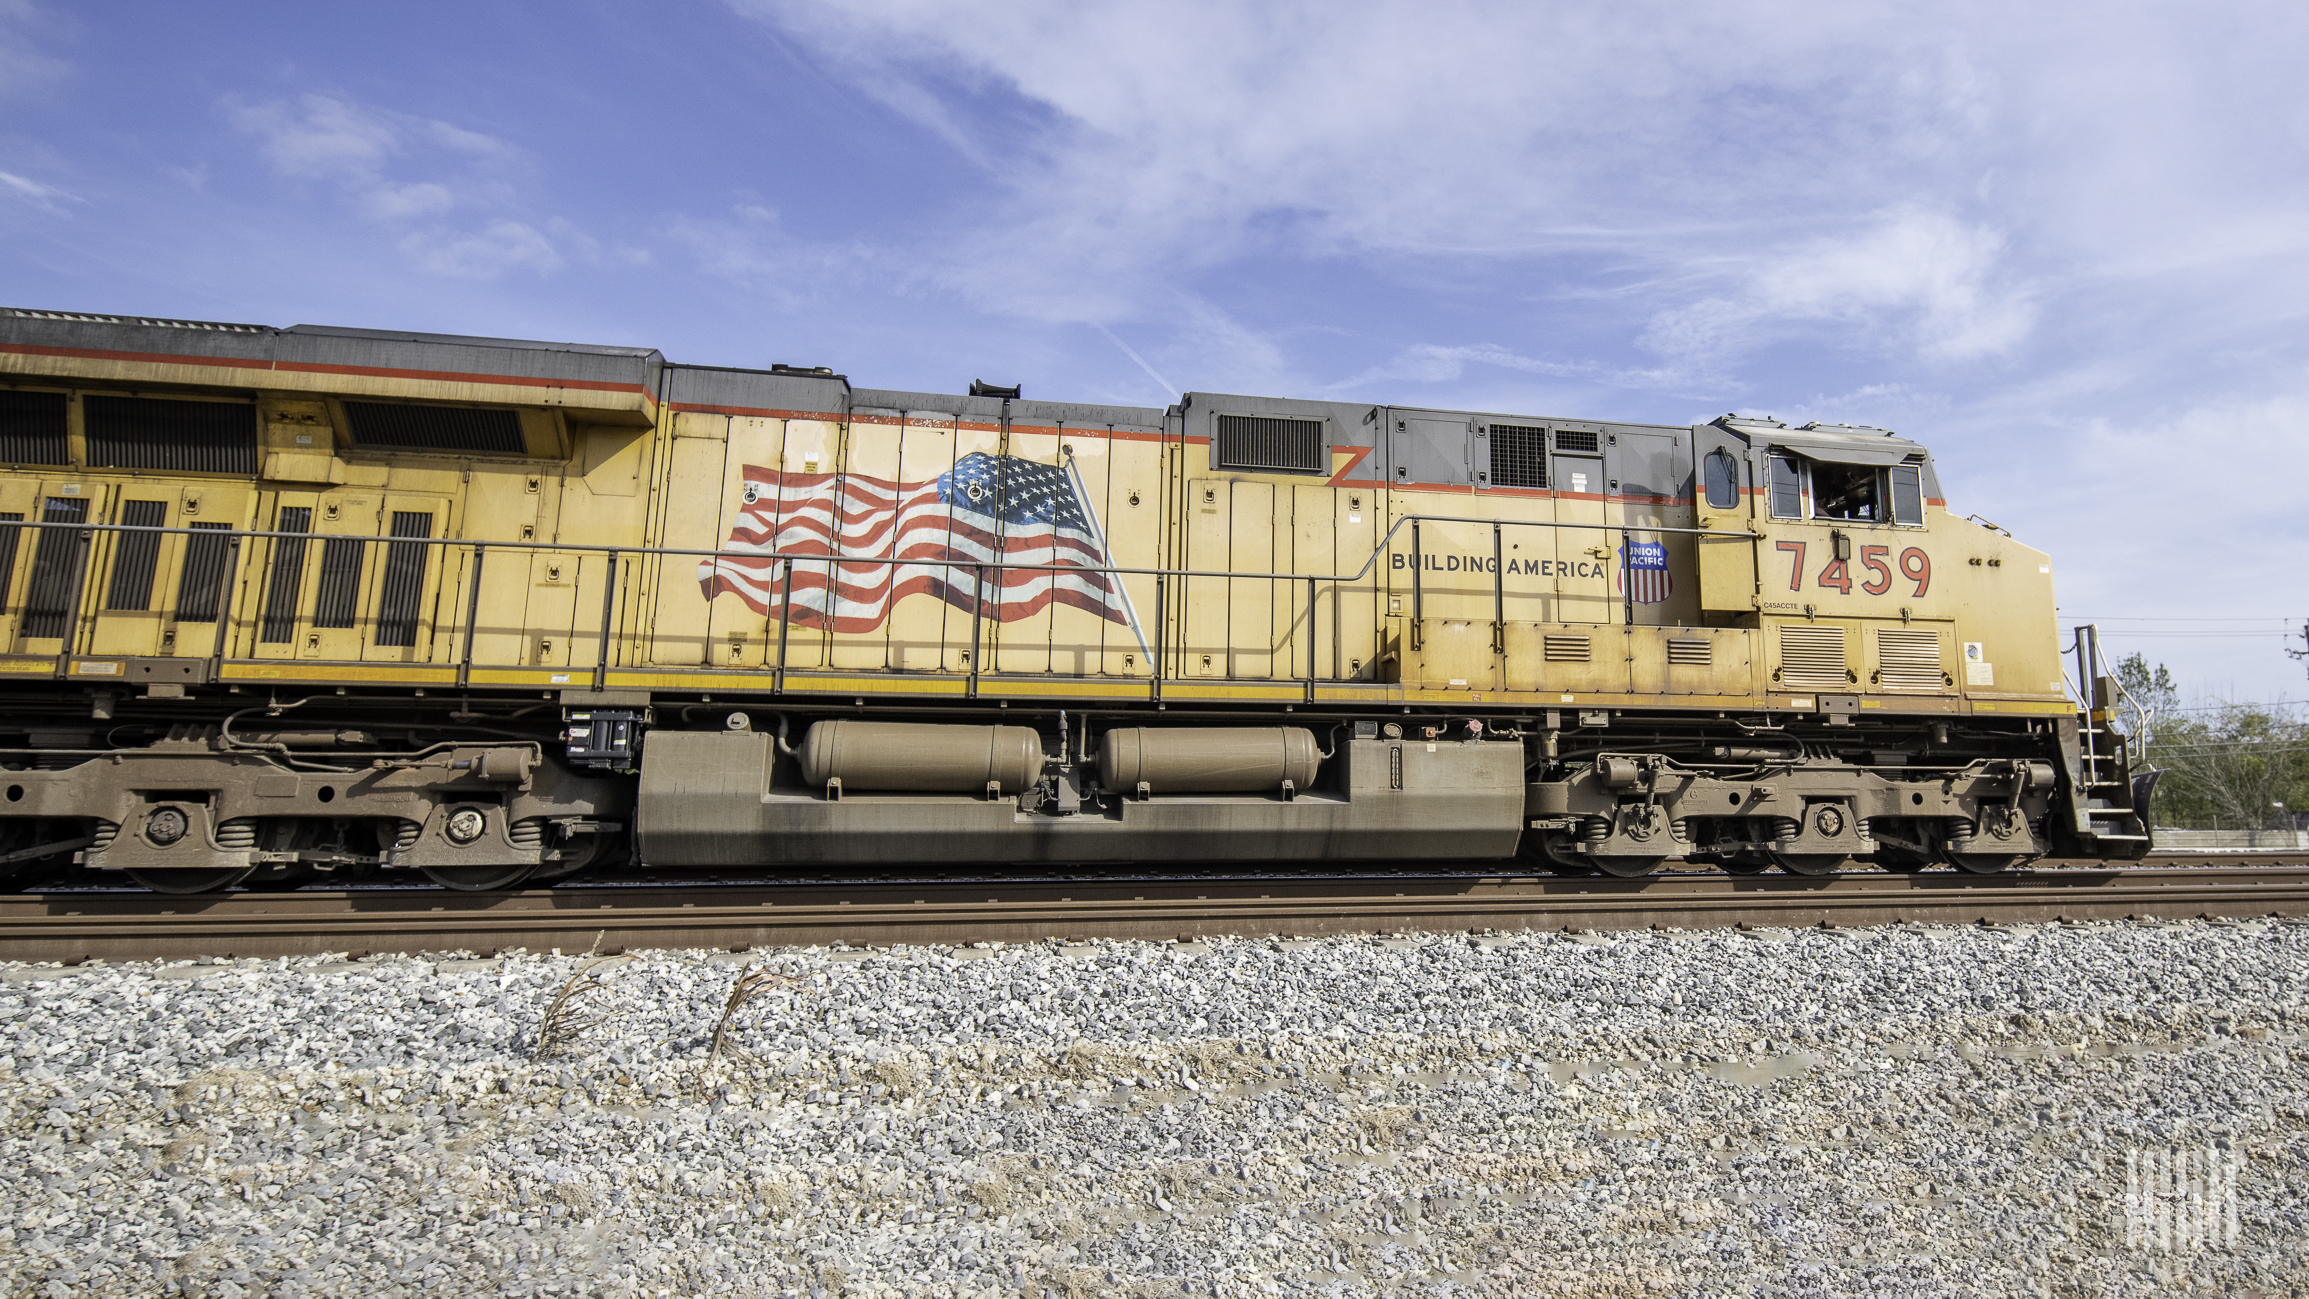 A yellow Union Pacific locomotive travels along train tracks with a blue sky in the background.